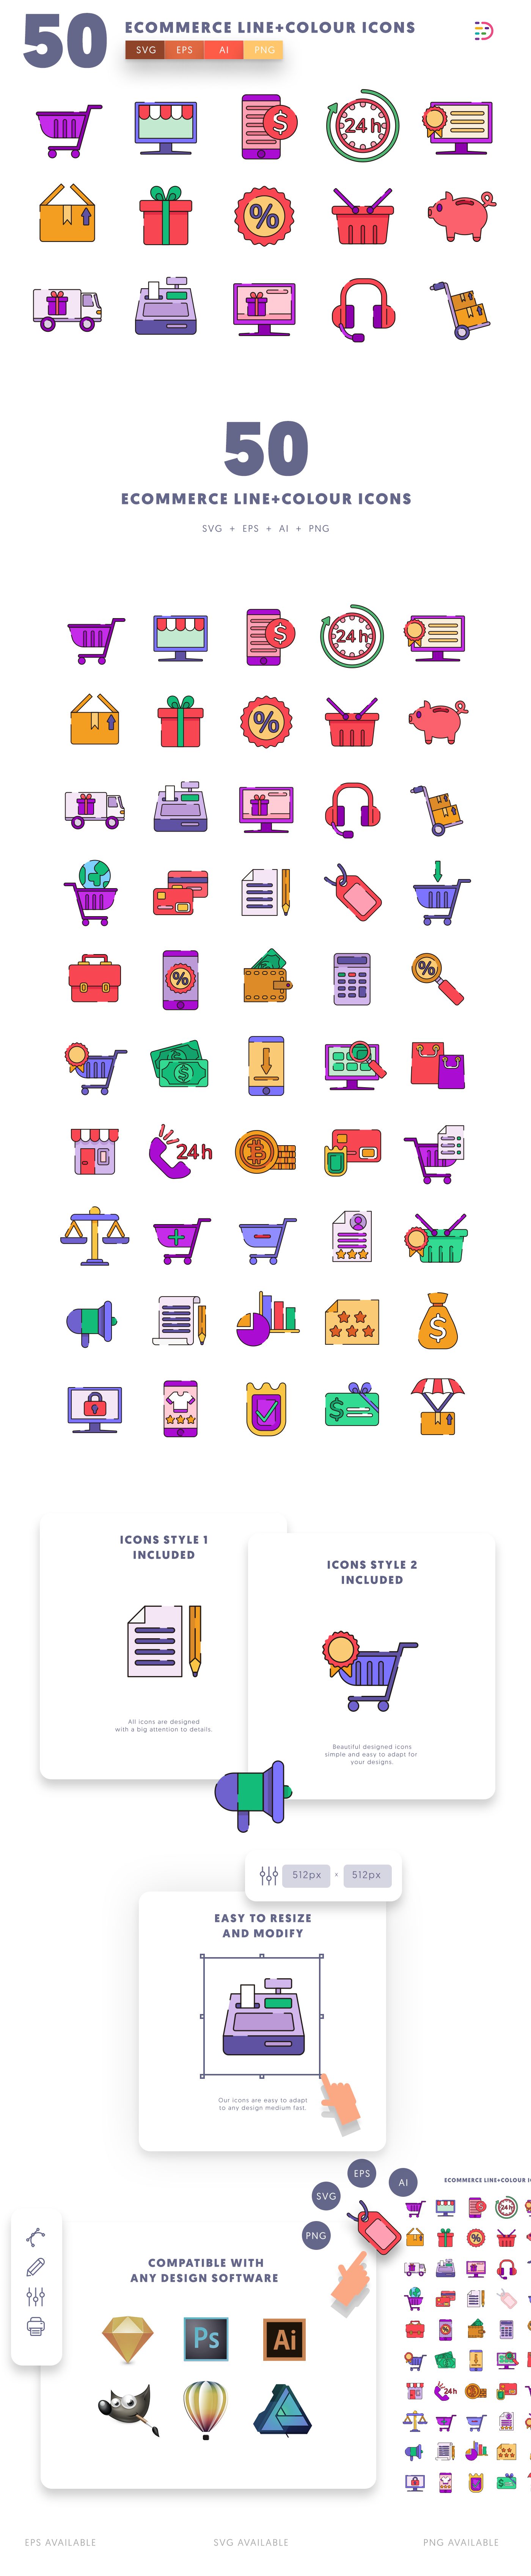 Editable ecommerce line and colour icons icon pack, easy to edit and customize icons